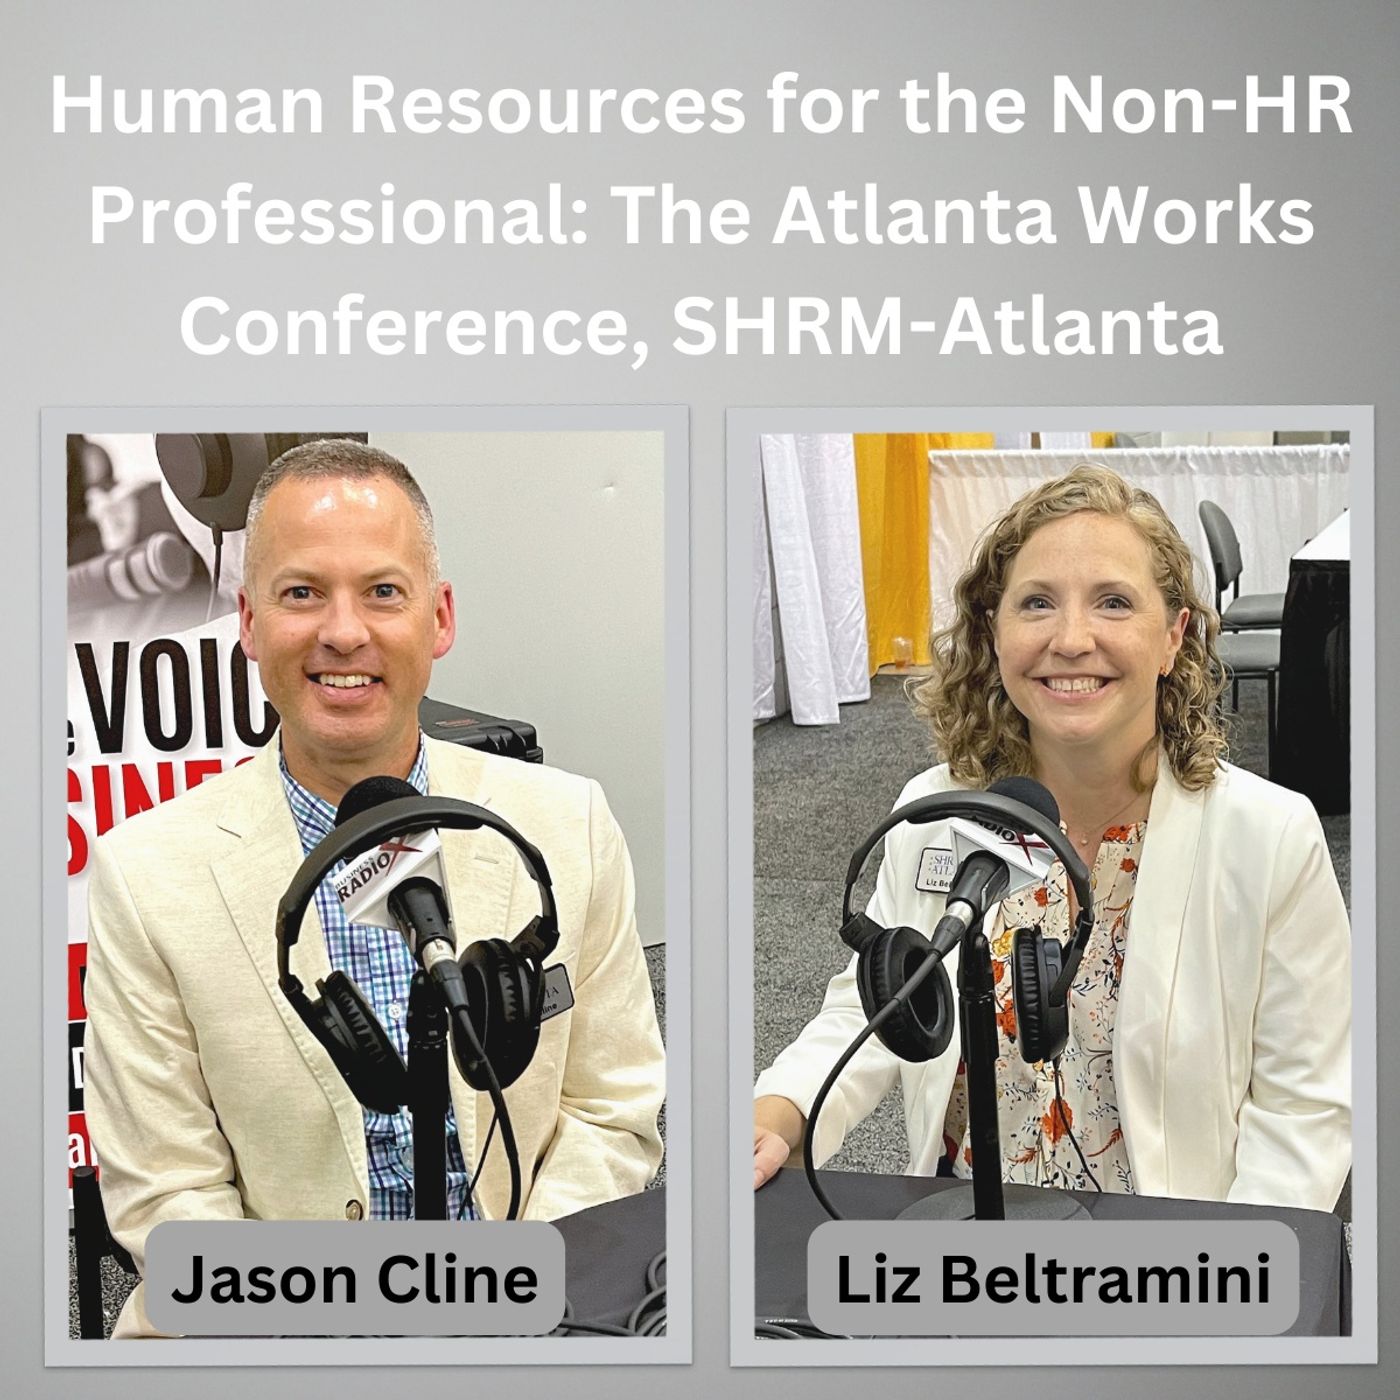 Human Resources for the Non-HR Professional: The Atlanta Works Conference, with Jason Cline and Liz Beltramini, SHRM-Atlanta